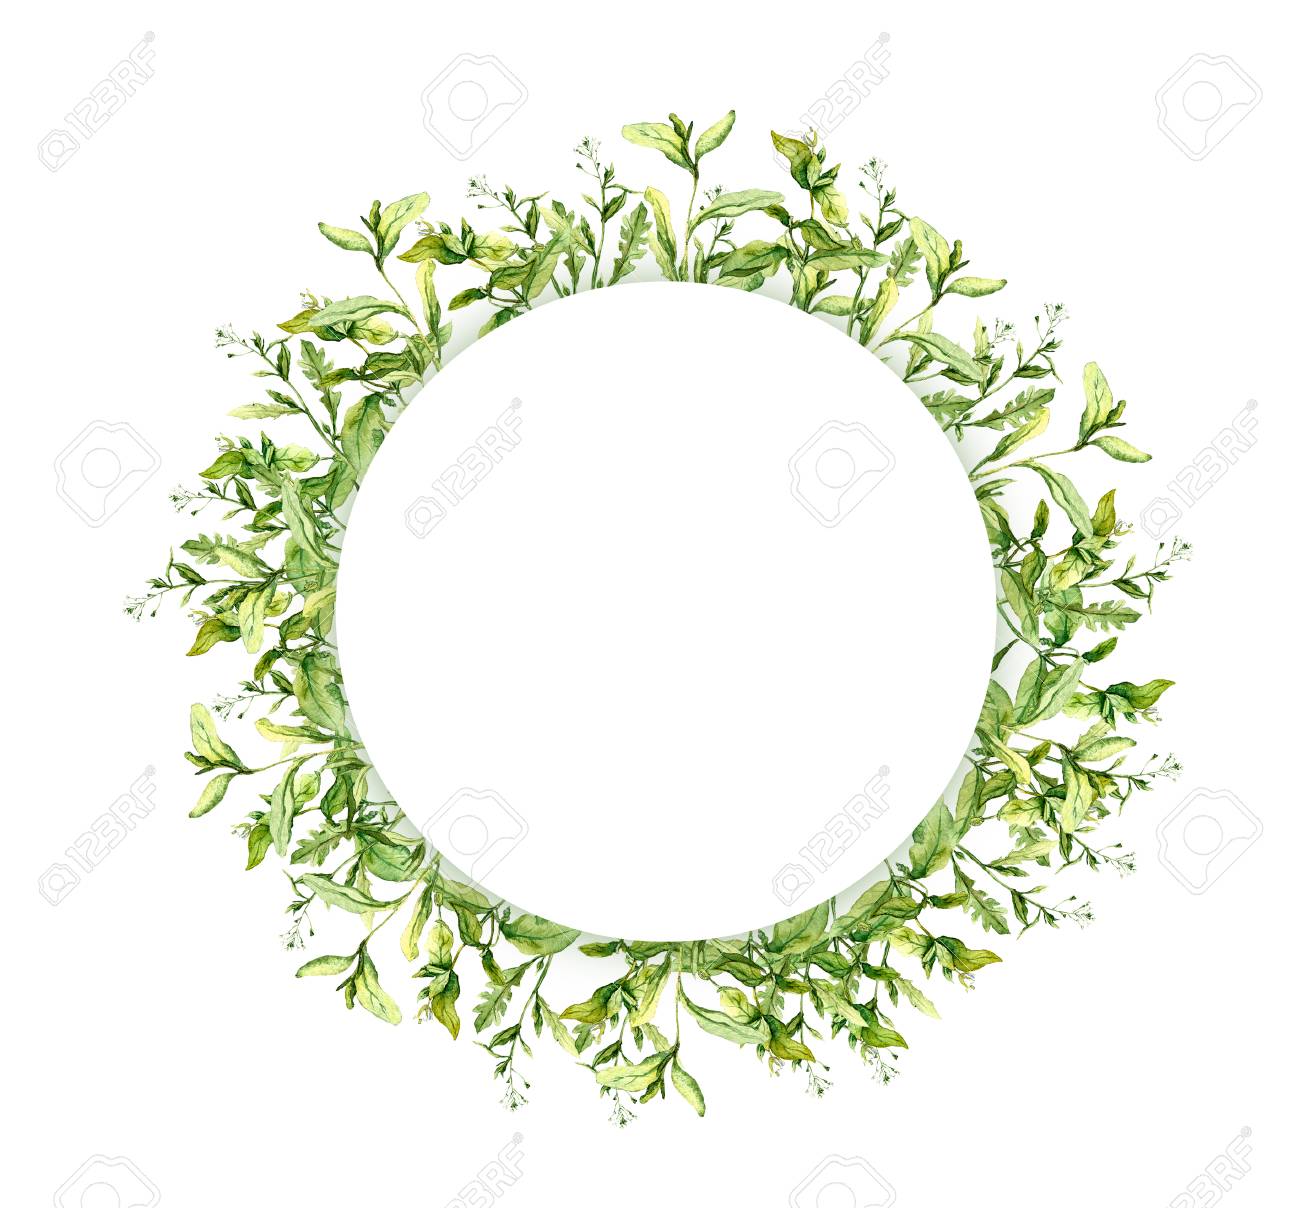 Free Herbs Clipart border, Download Free Clip Art on Owips